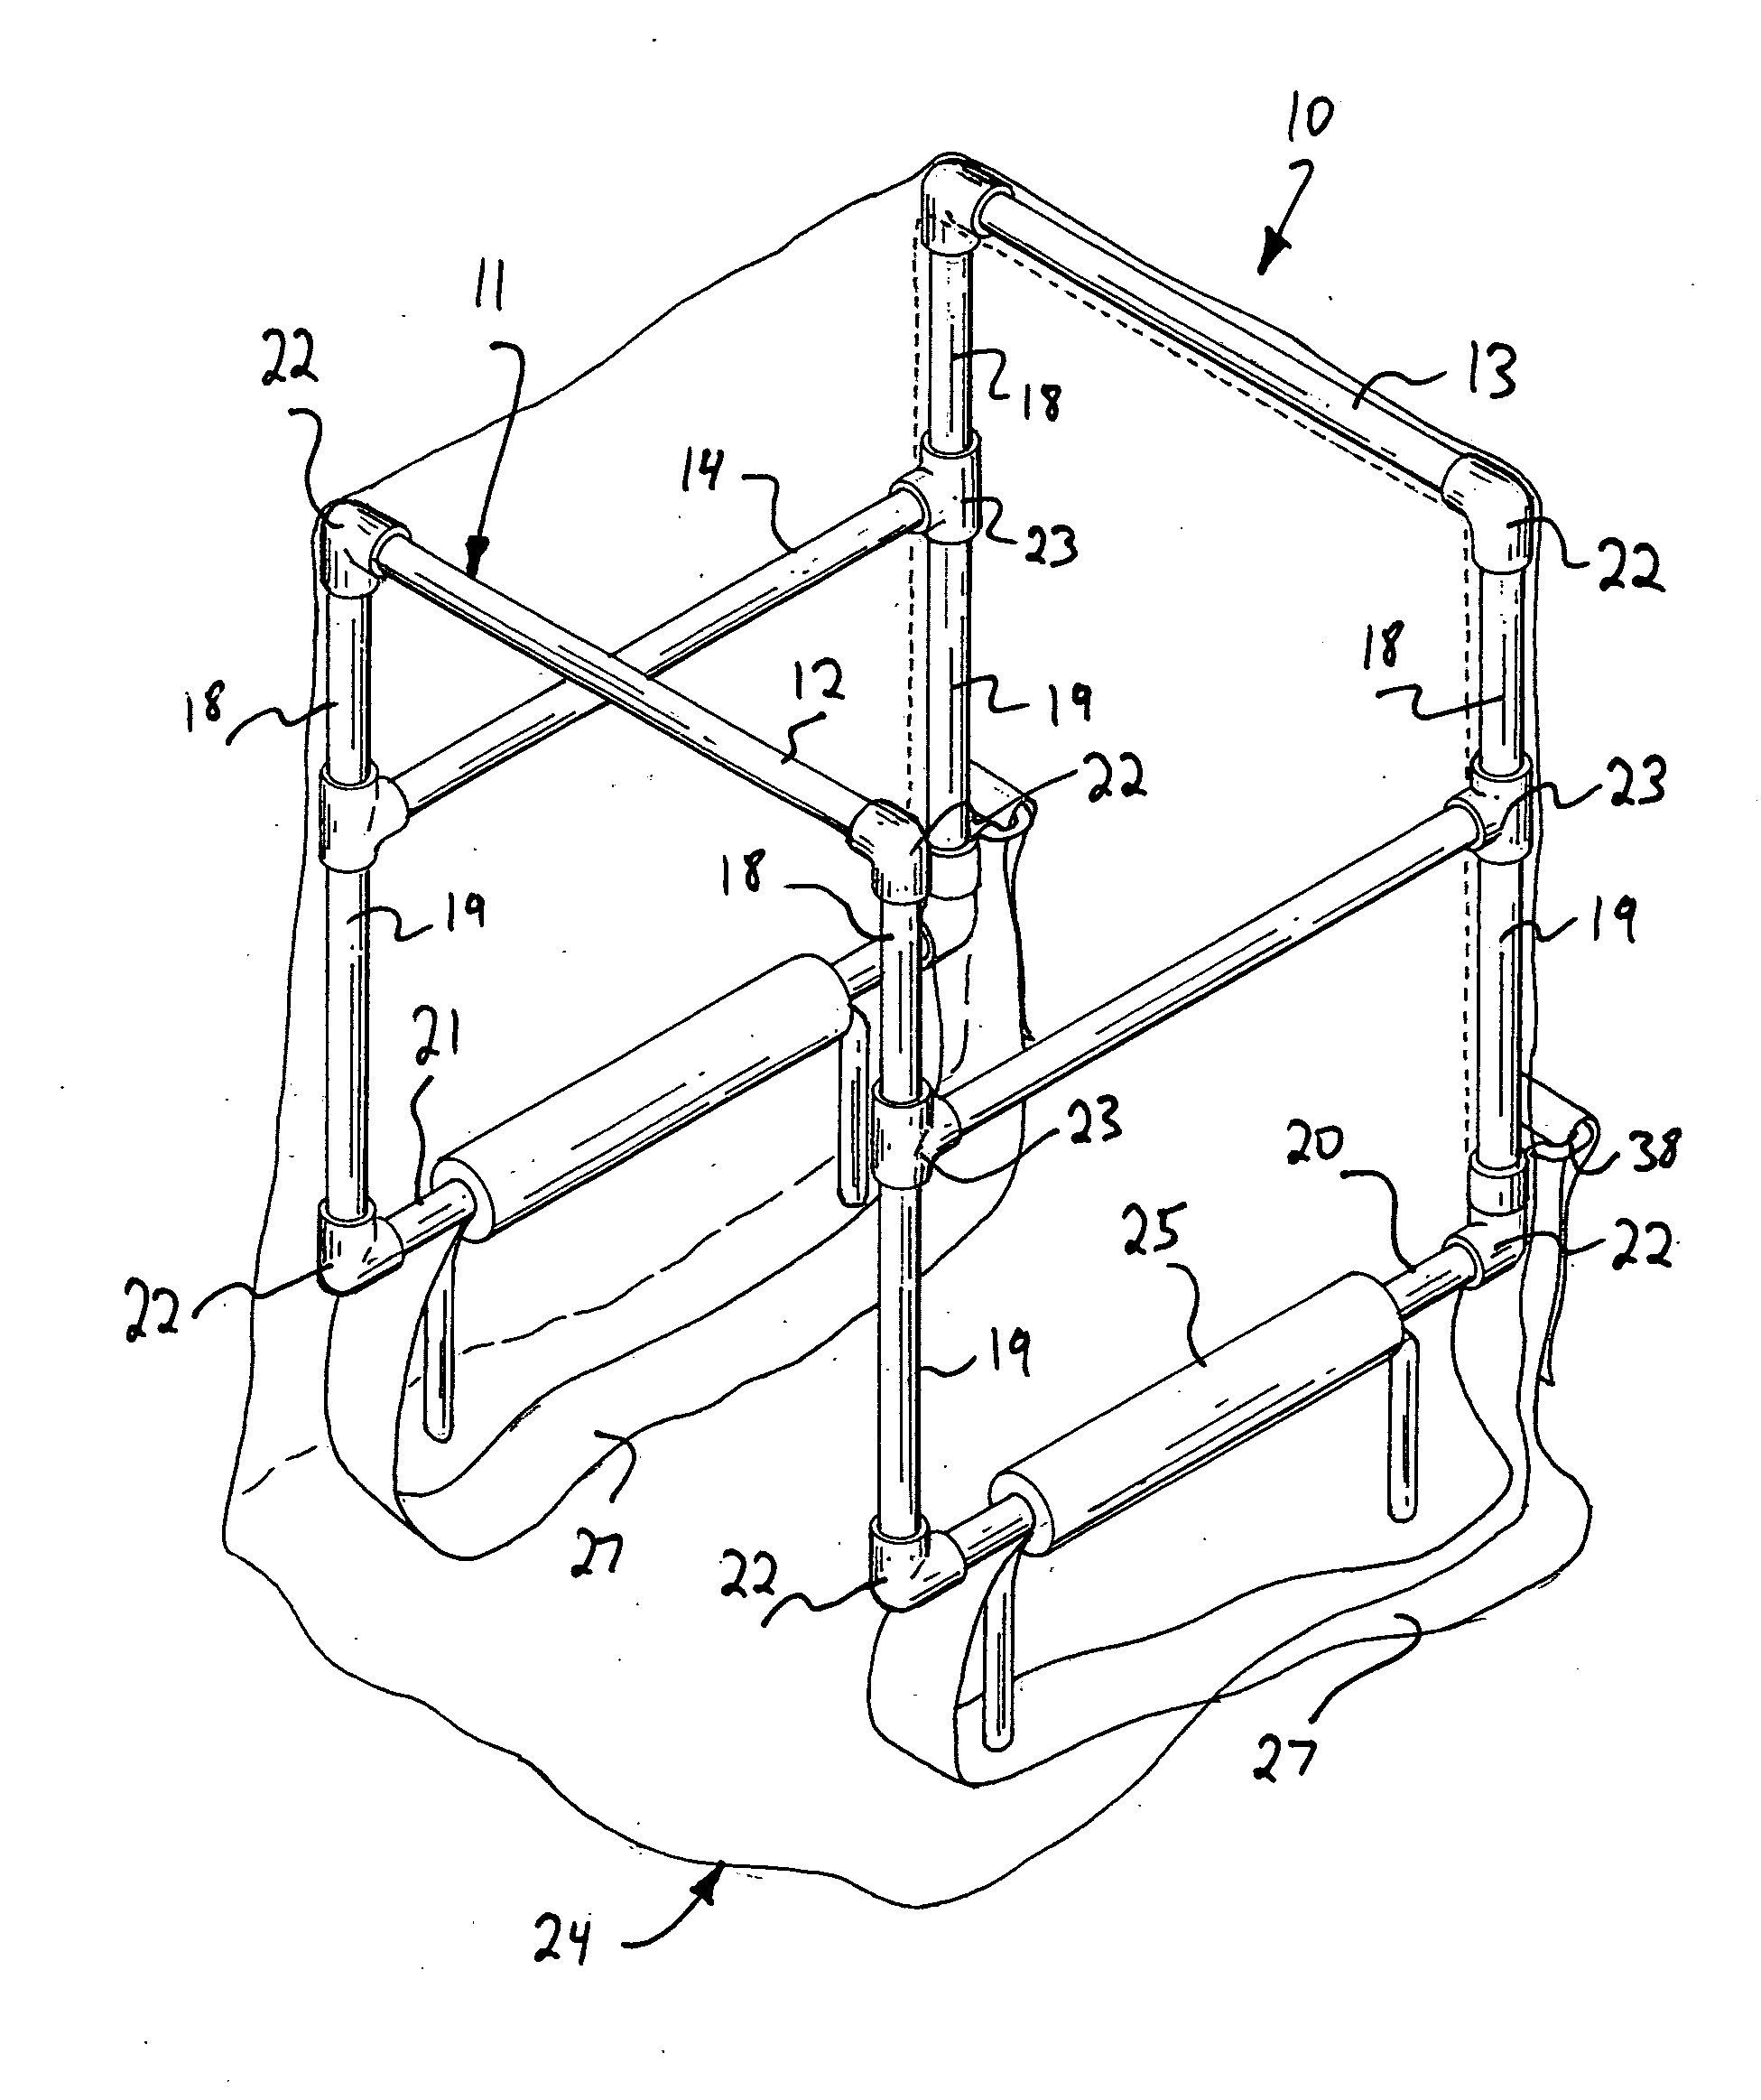 Camouflage cover apparatus